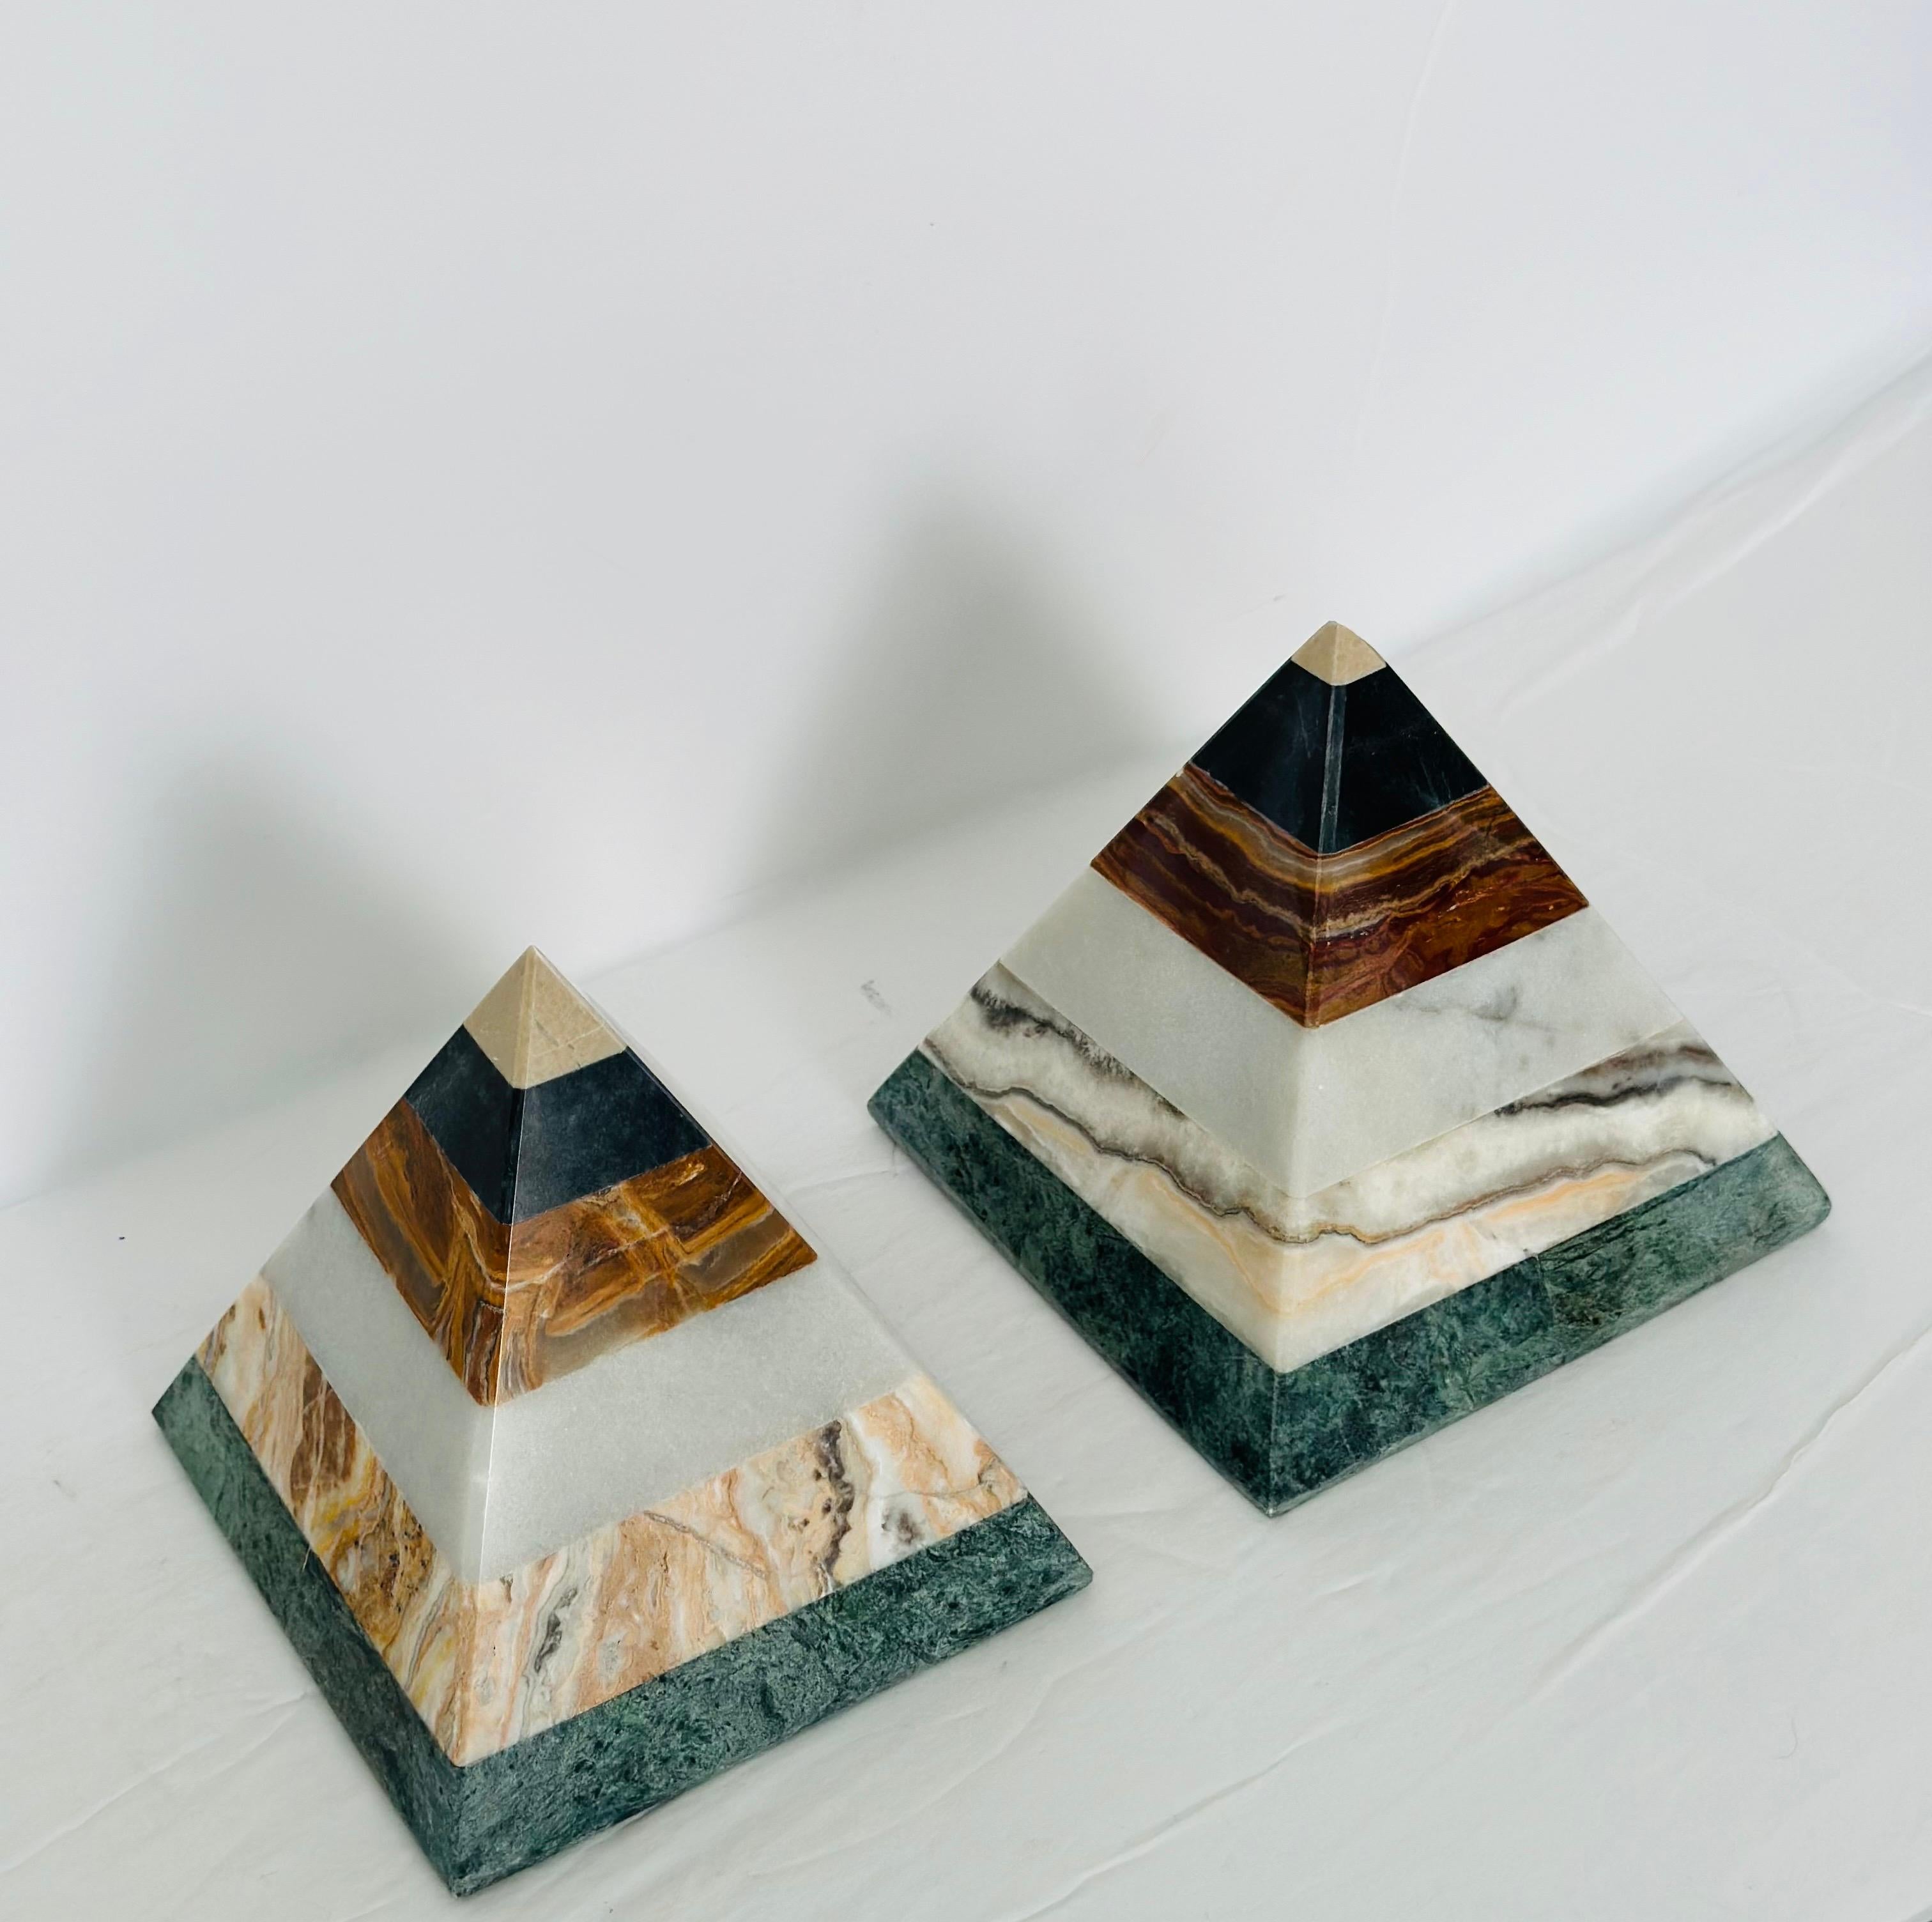 Vintage Stacked Gemstone Sculptural Pyramids - a Pair In Good Condition For Sale In Farmington Hills, MI